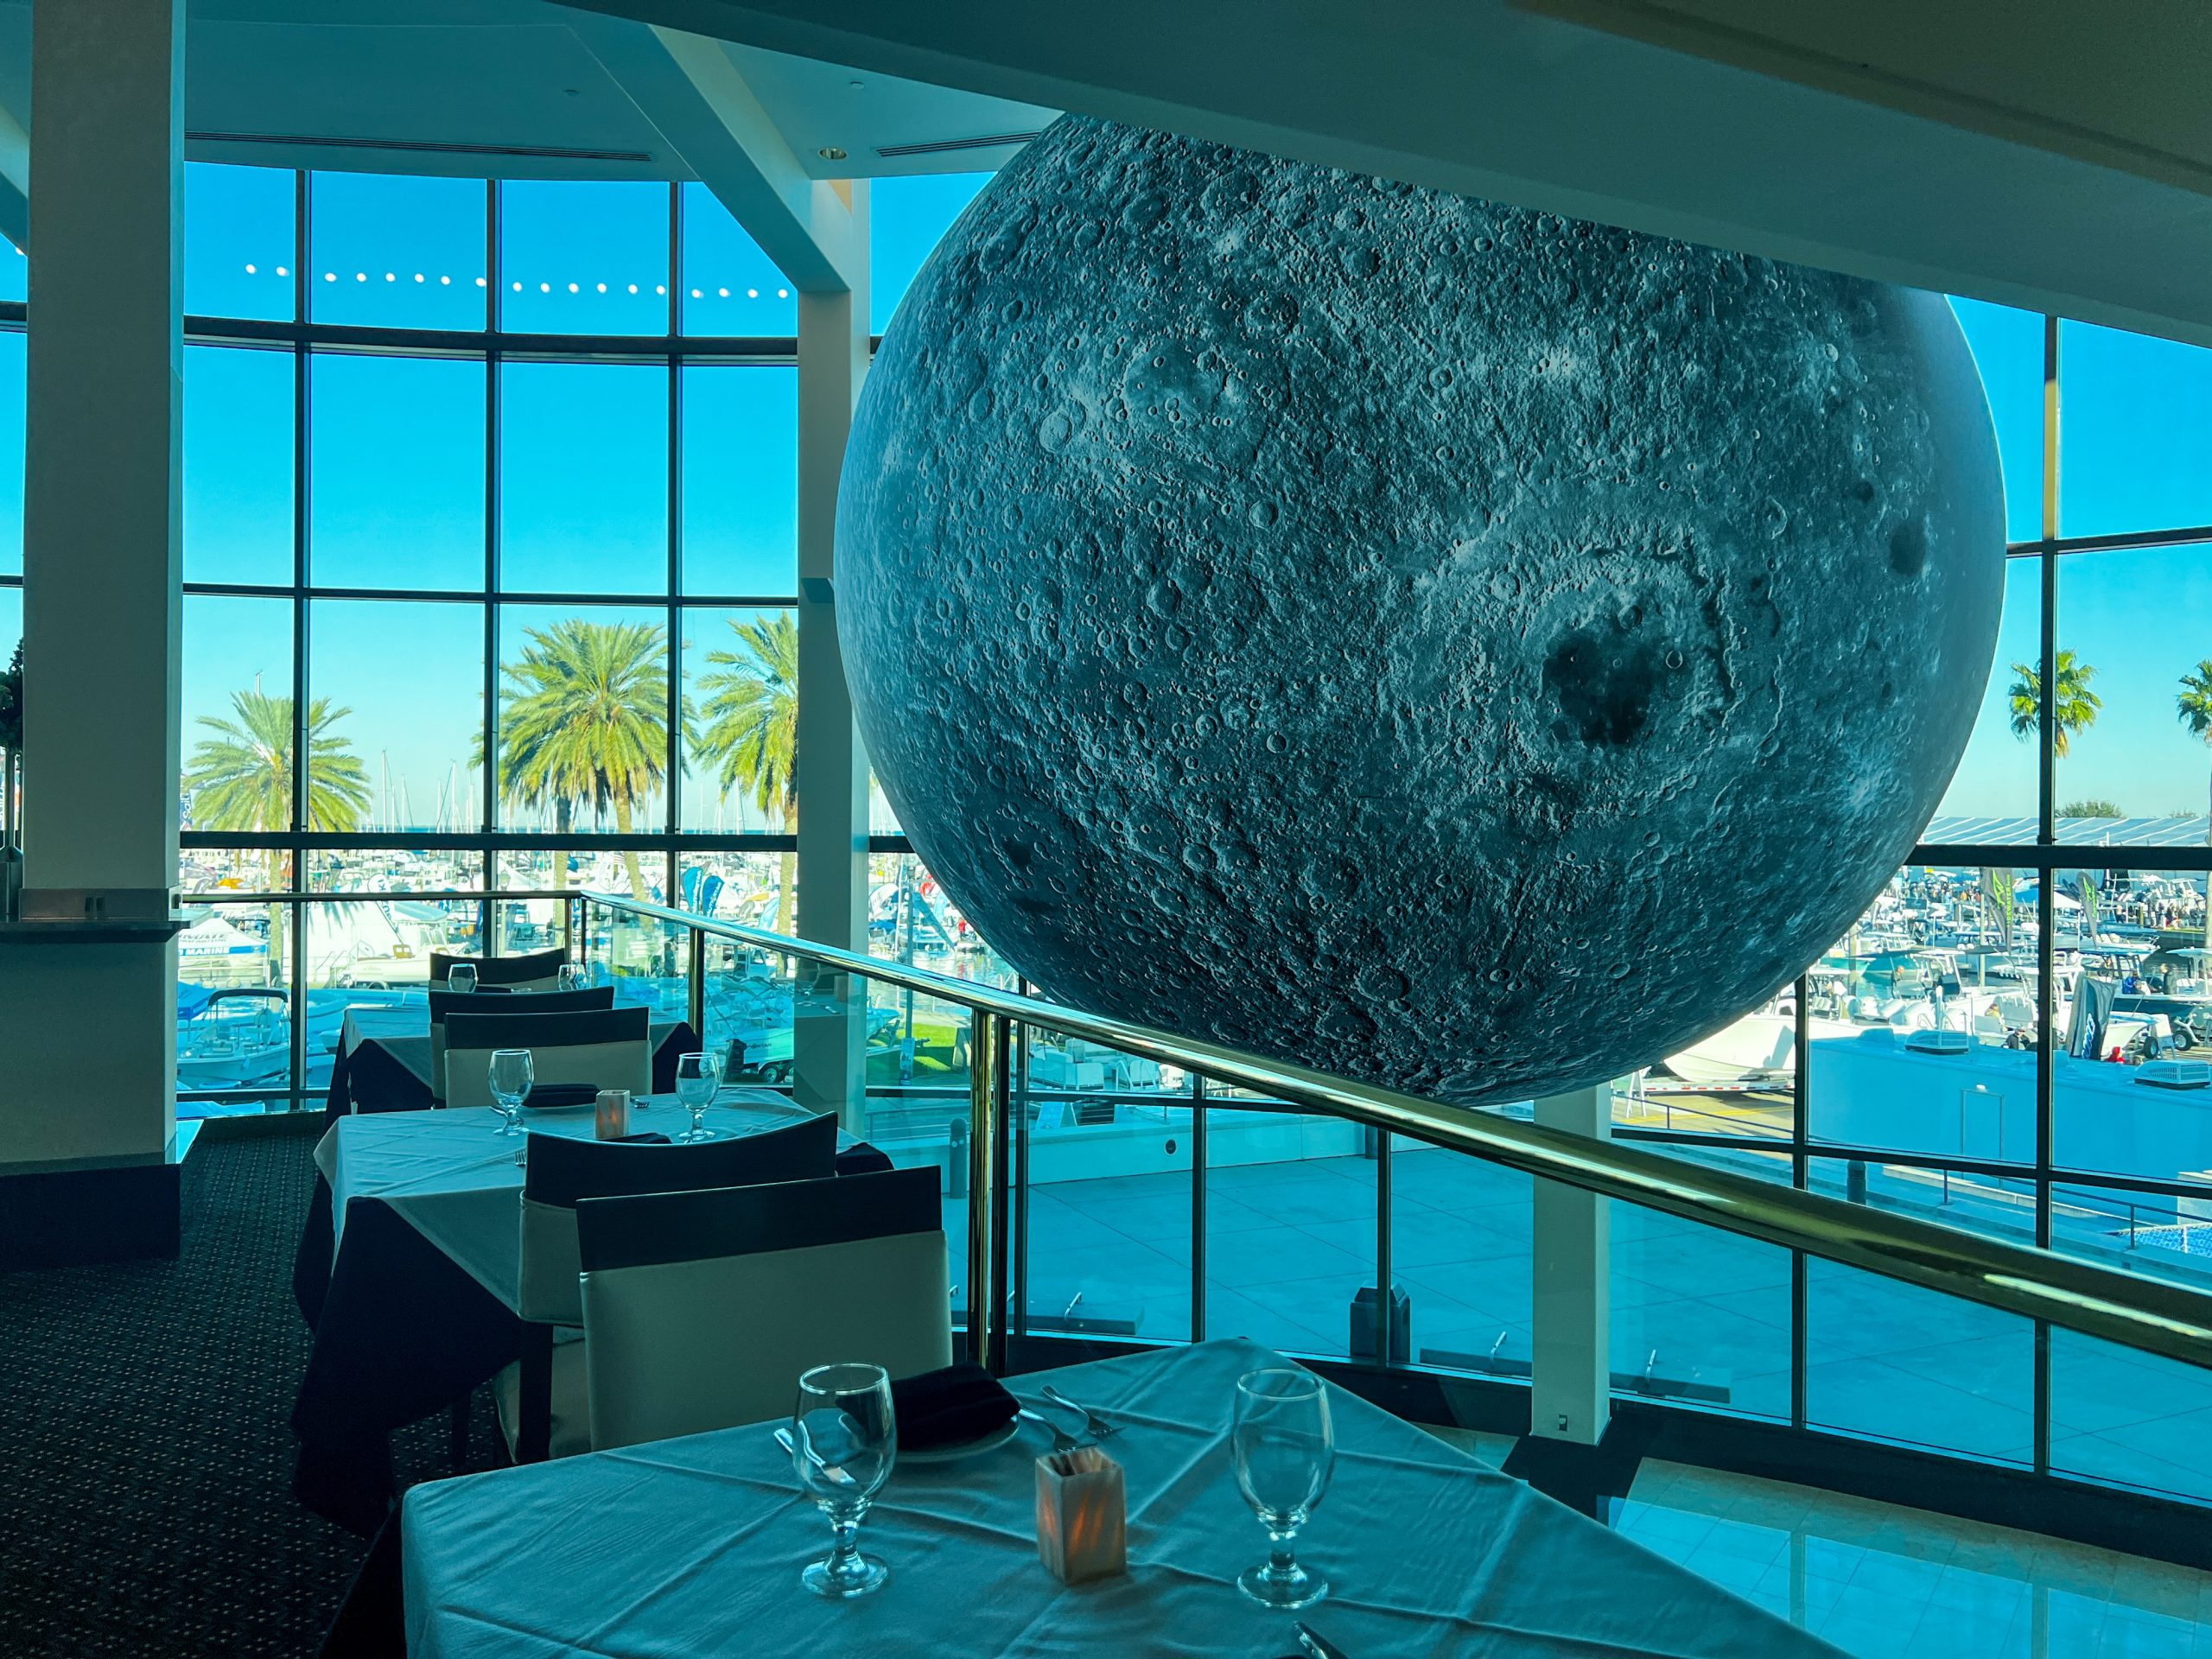 Sonata - View of the Moon installation during the day